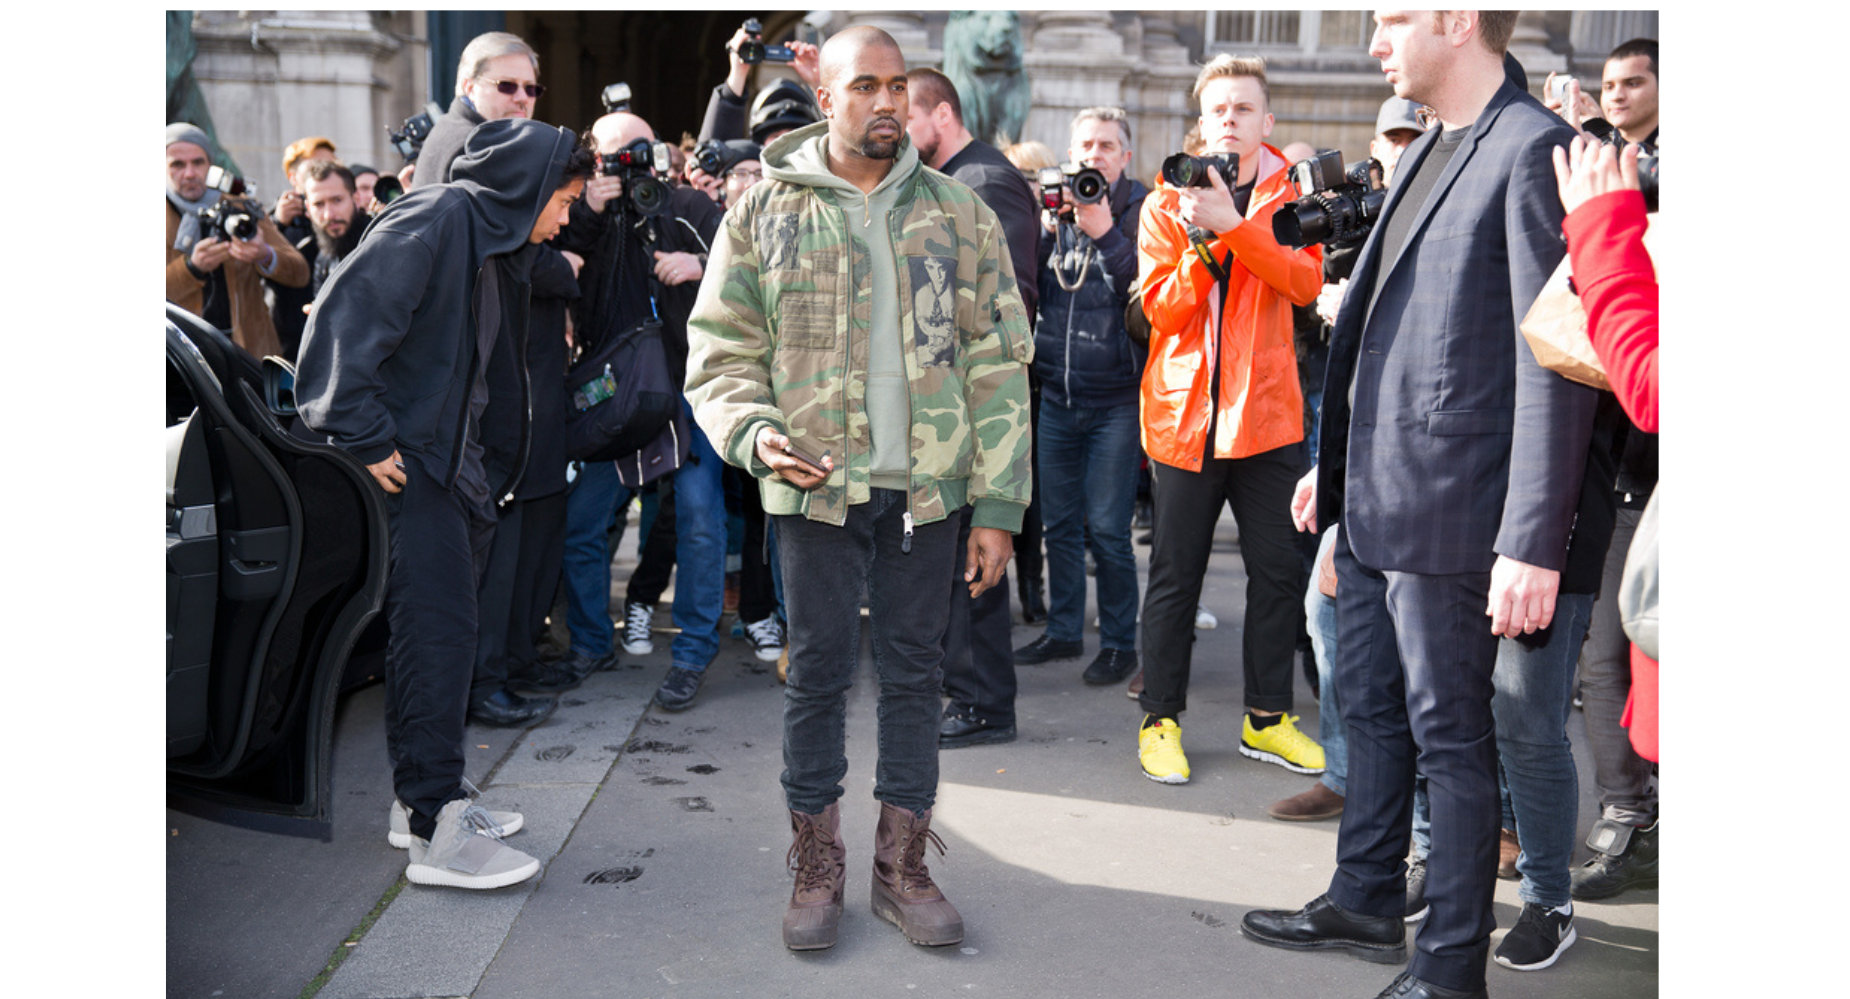 Kanye West's Feud With Adidas And Gap Heats Up: What's On The Line For Him And The Companies